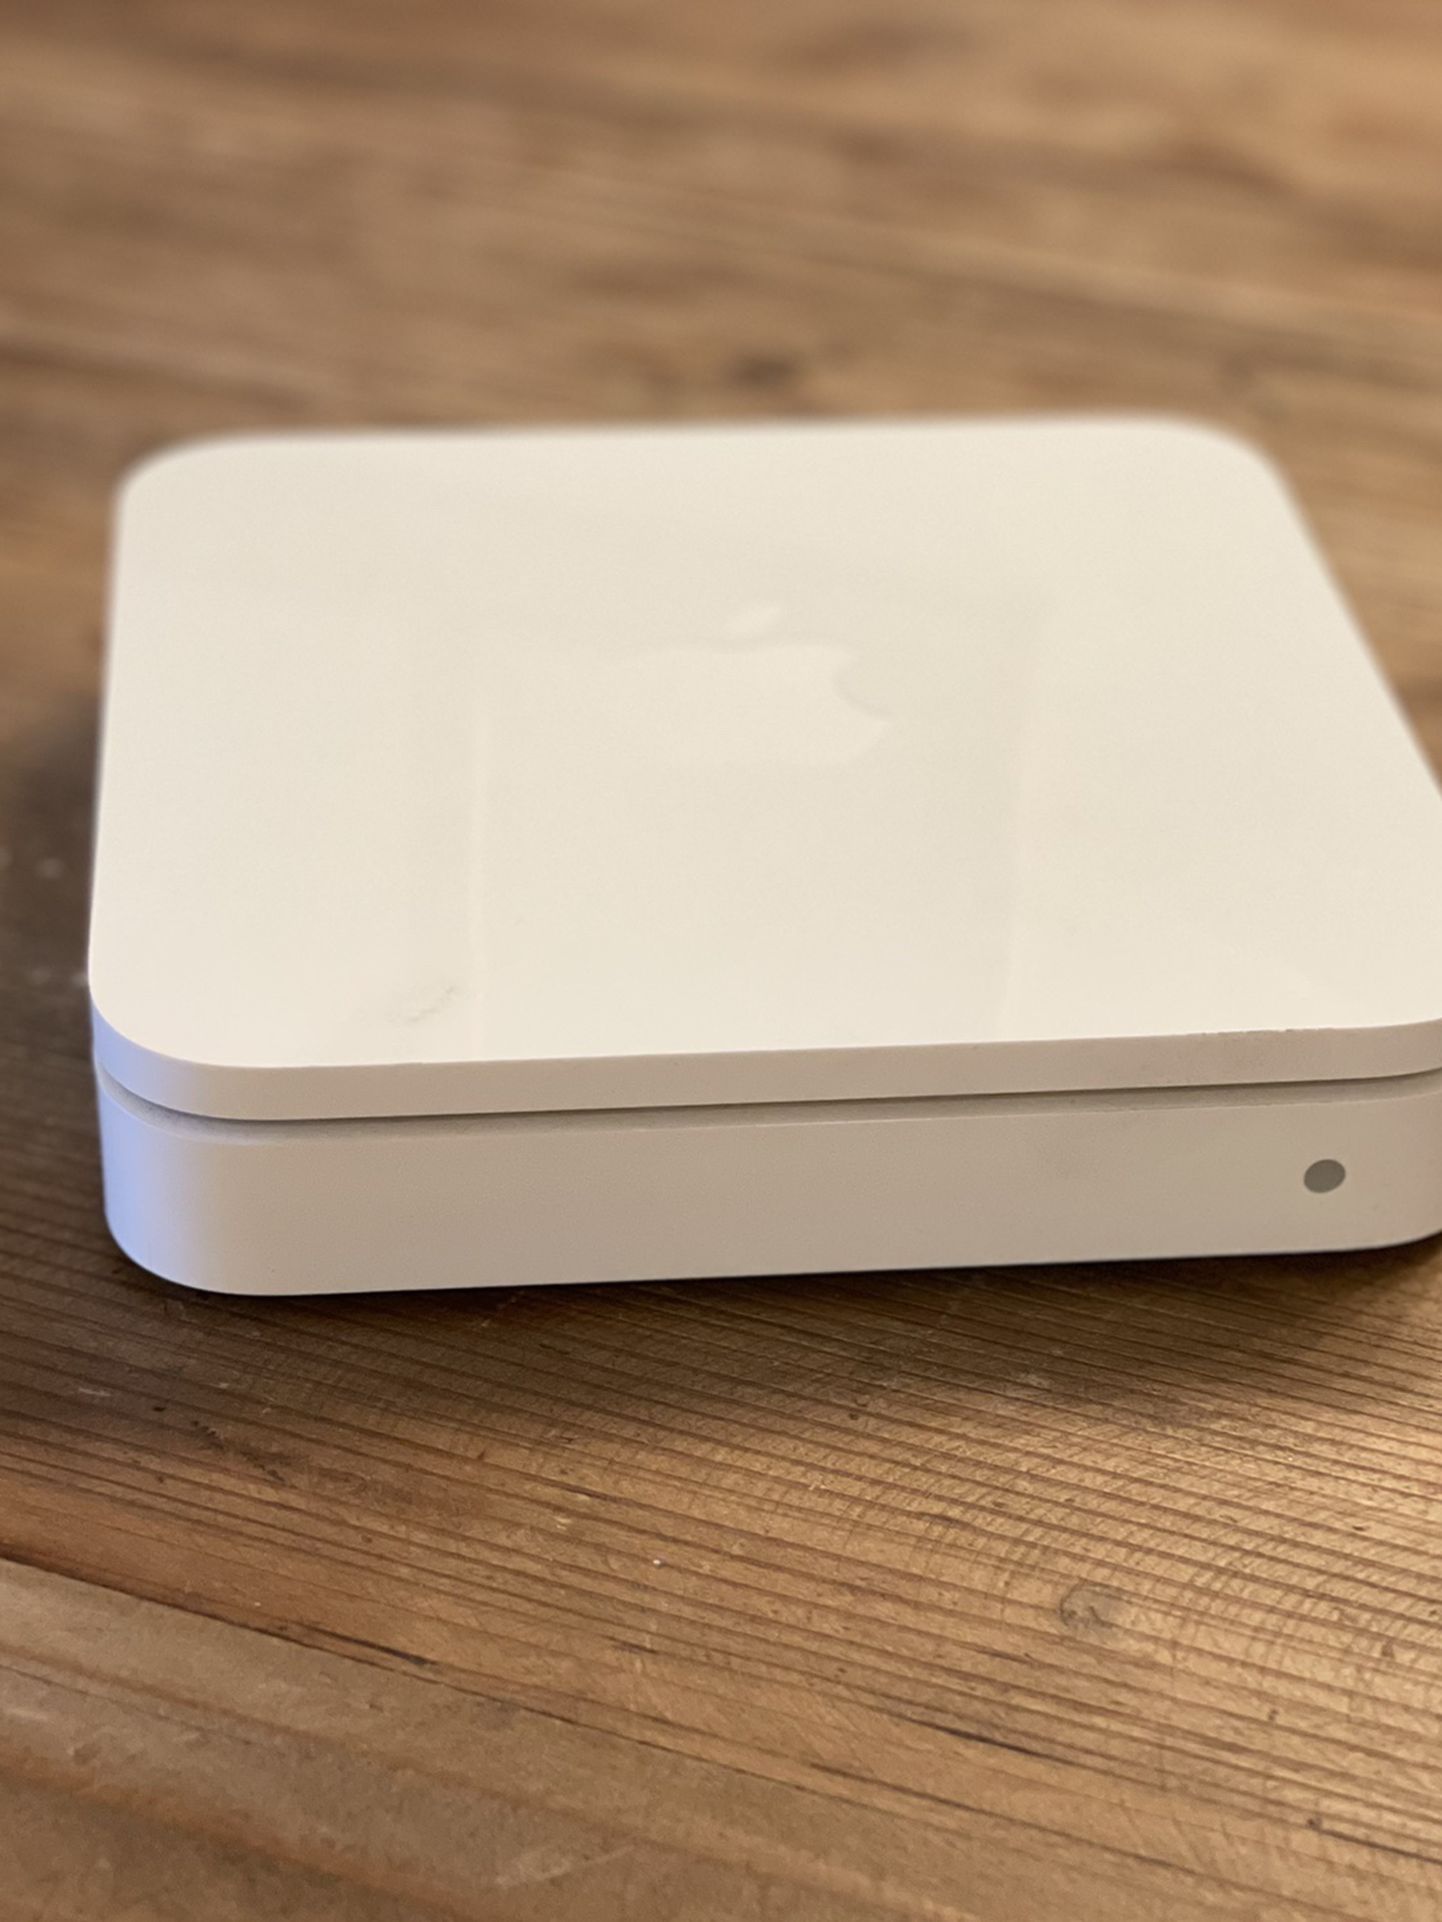 Apple AirPort Extreme 5th Generation WiFi Router